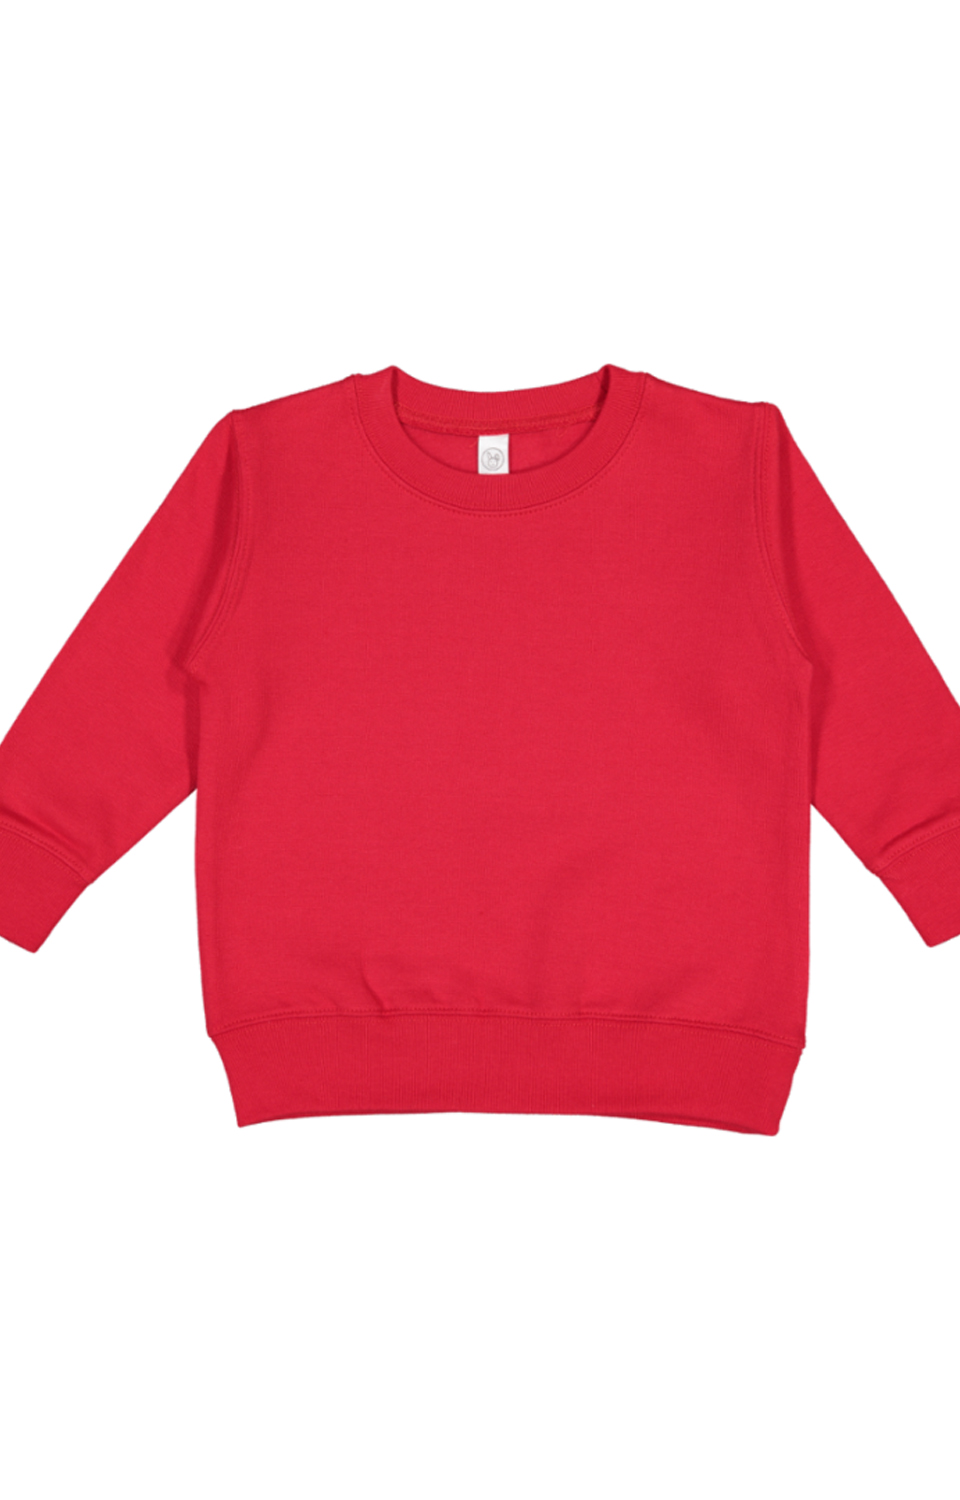 Available in 13 Colors Heather Rabbit Skins Toddler Sweatshirt M-3317